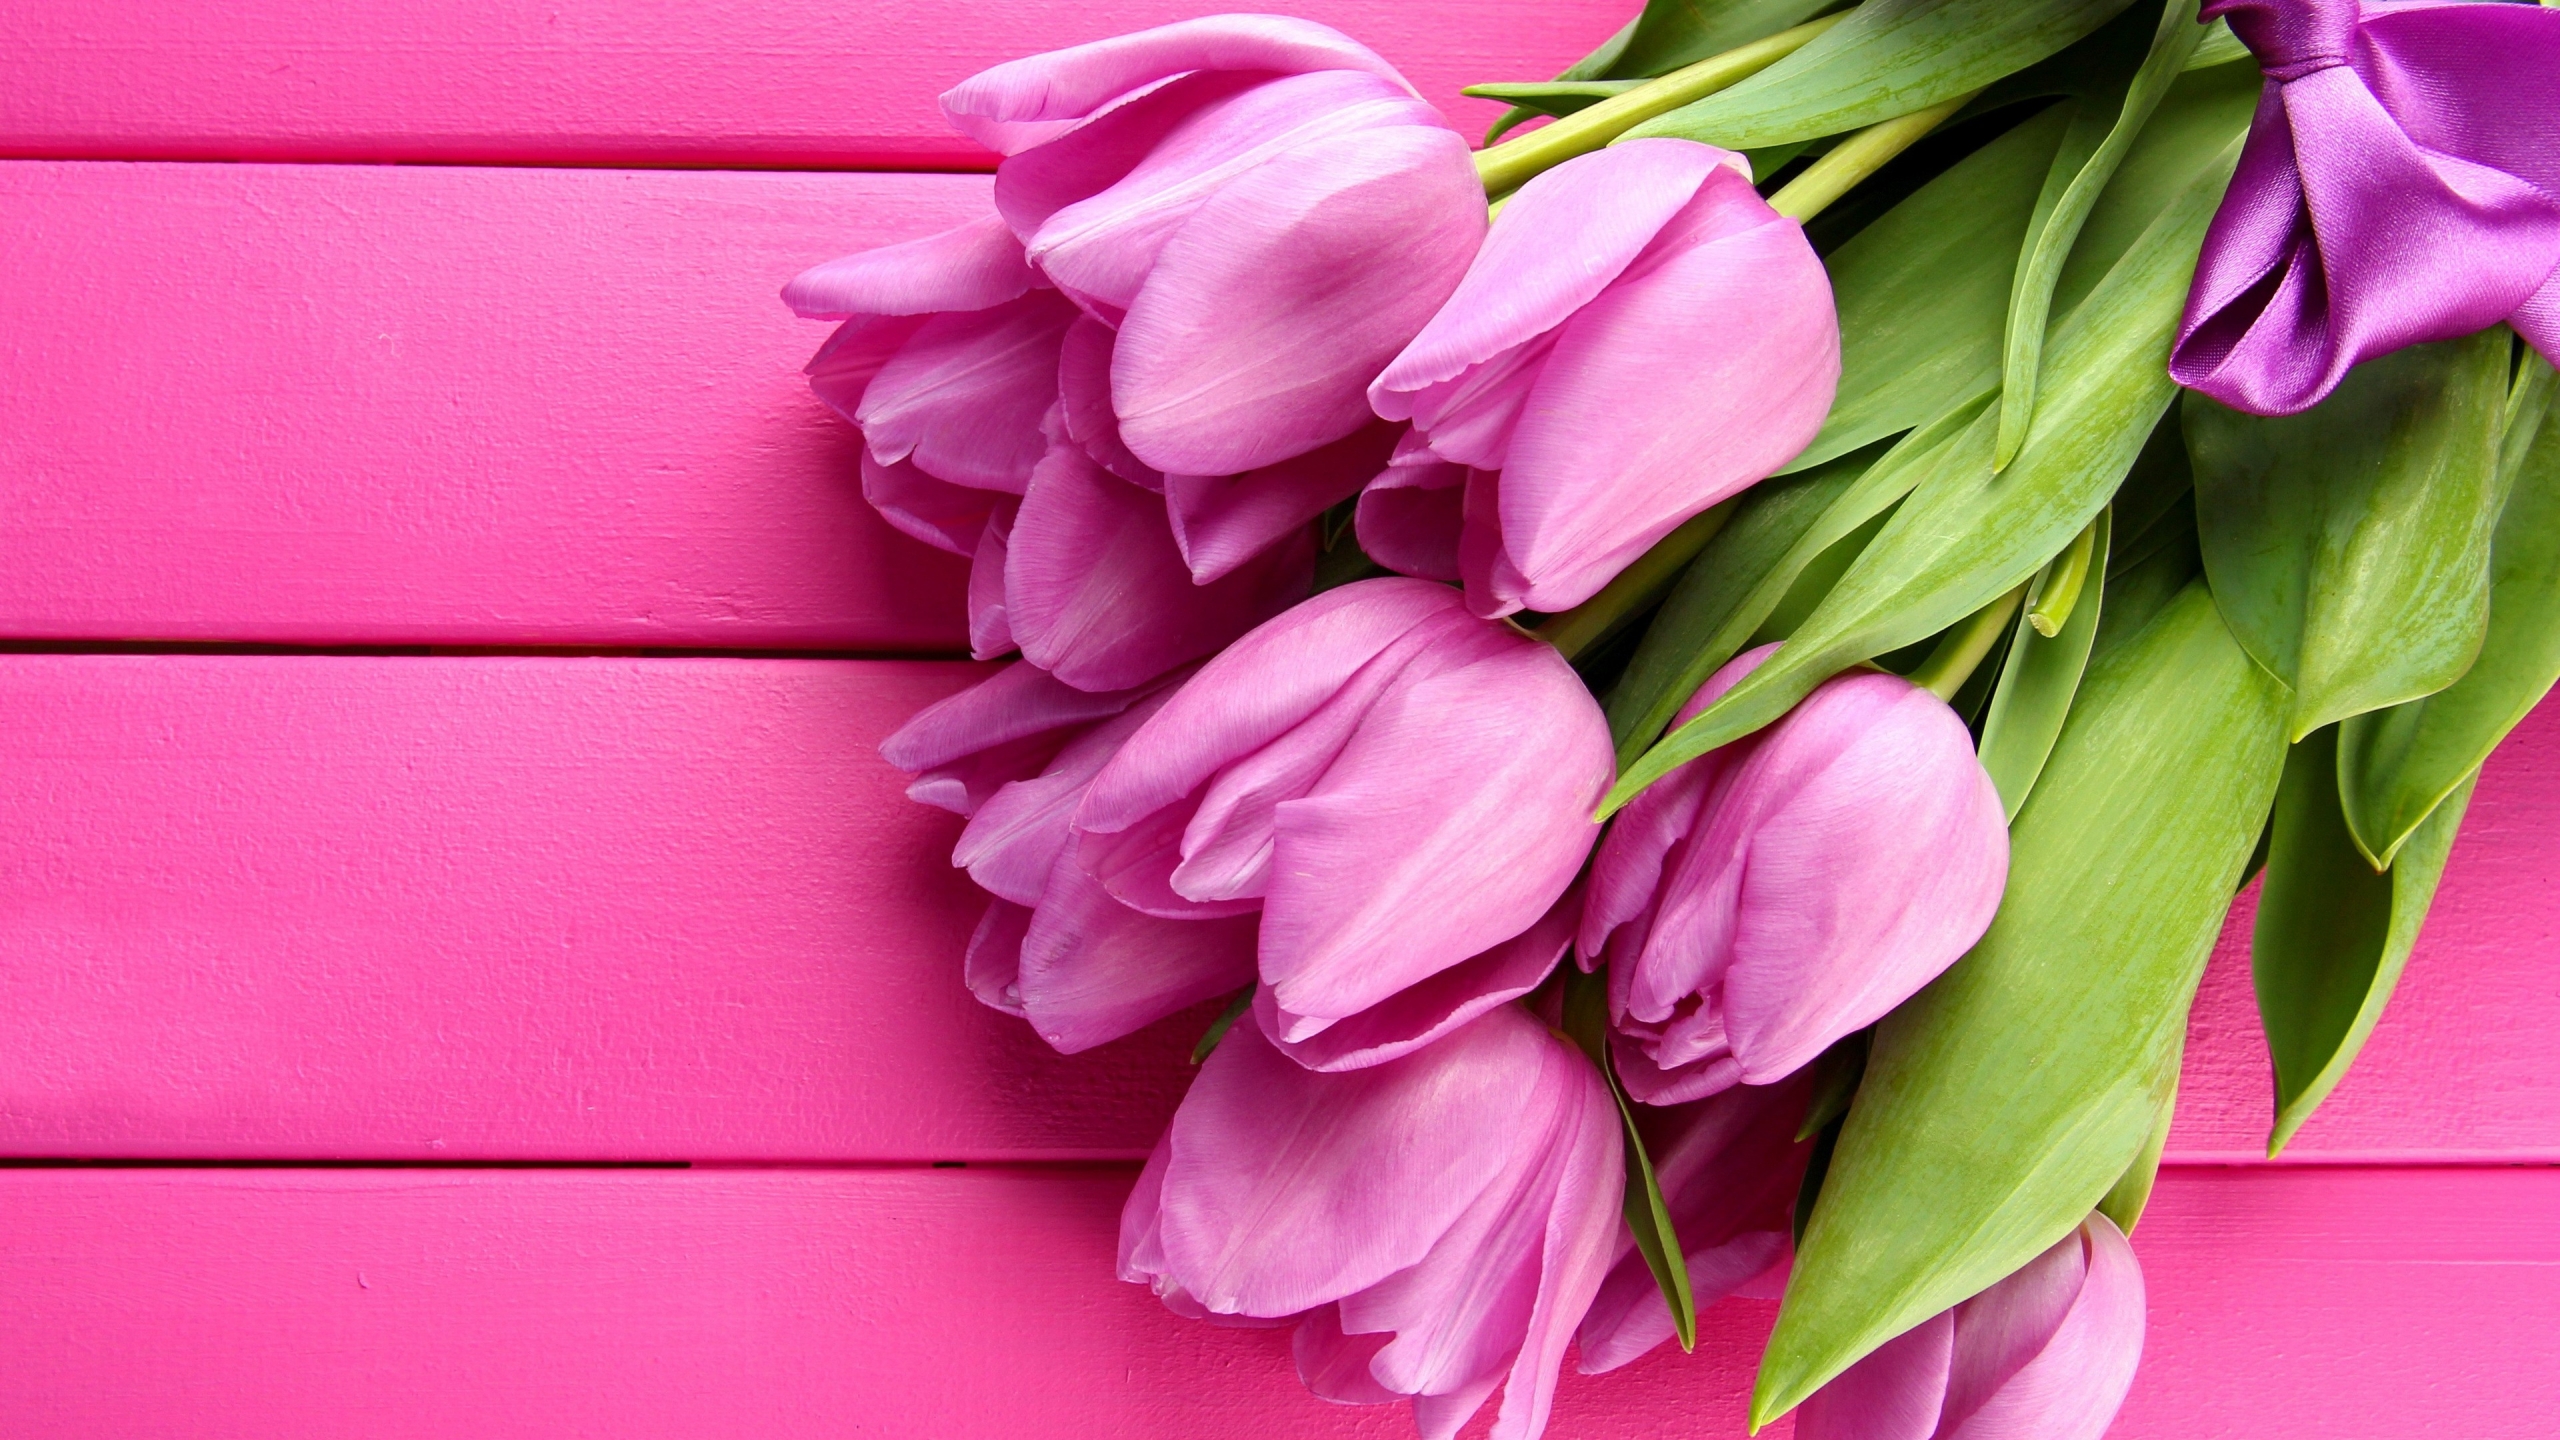 Gorgeous Pink Tulips for 2560x1440 HDTV resolution